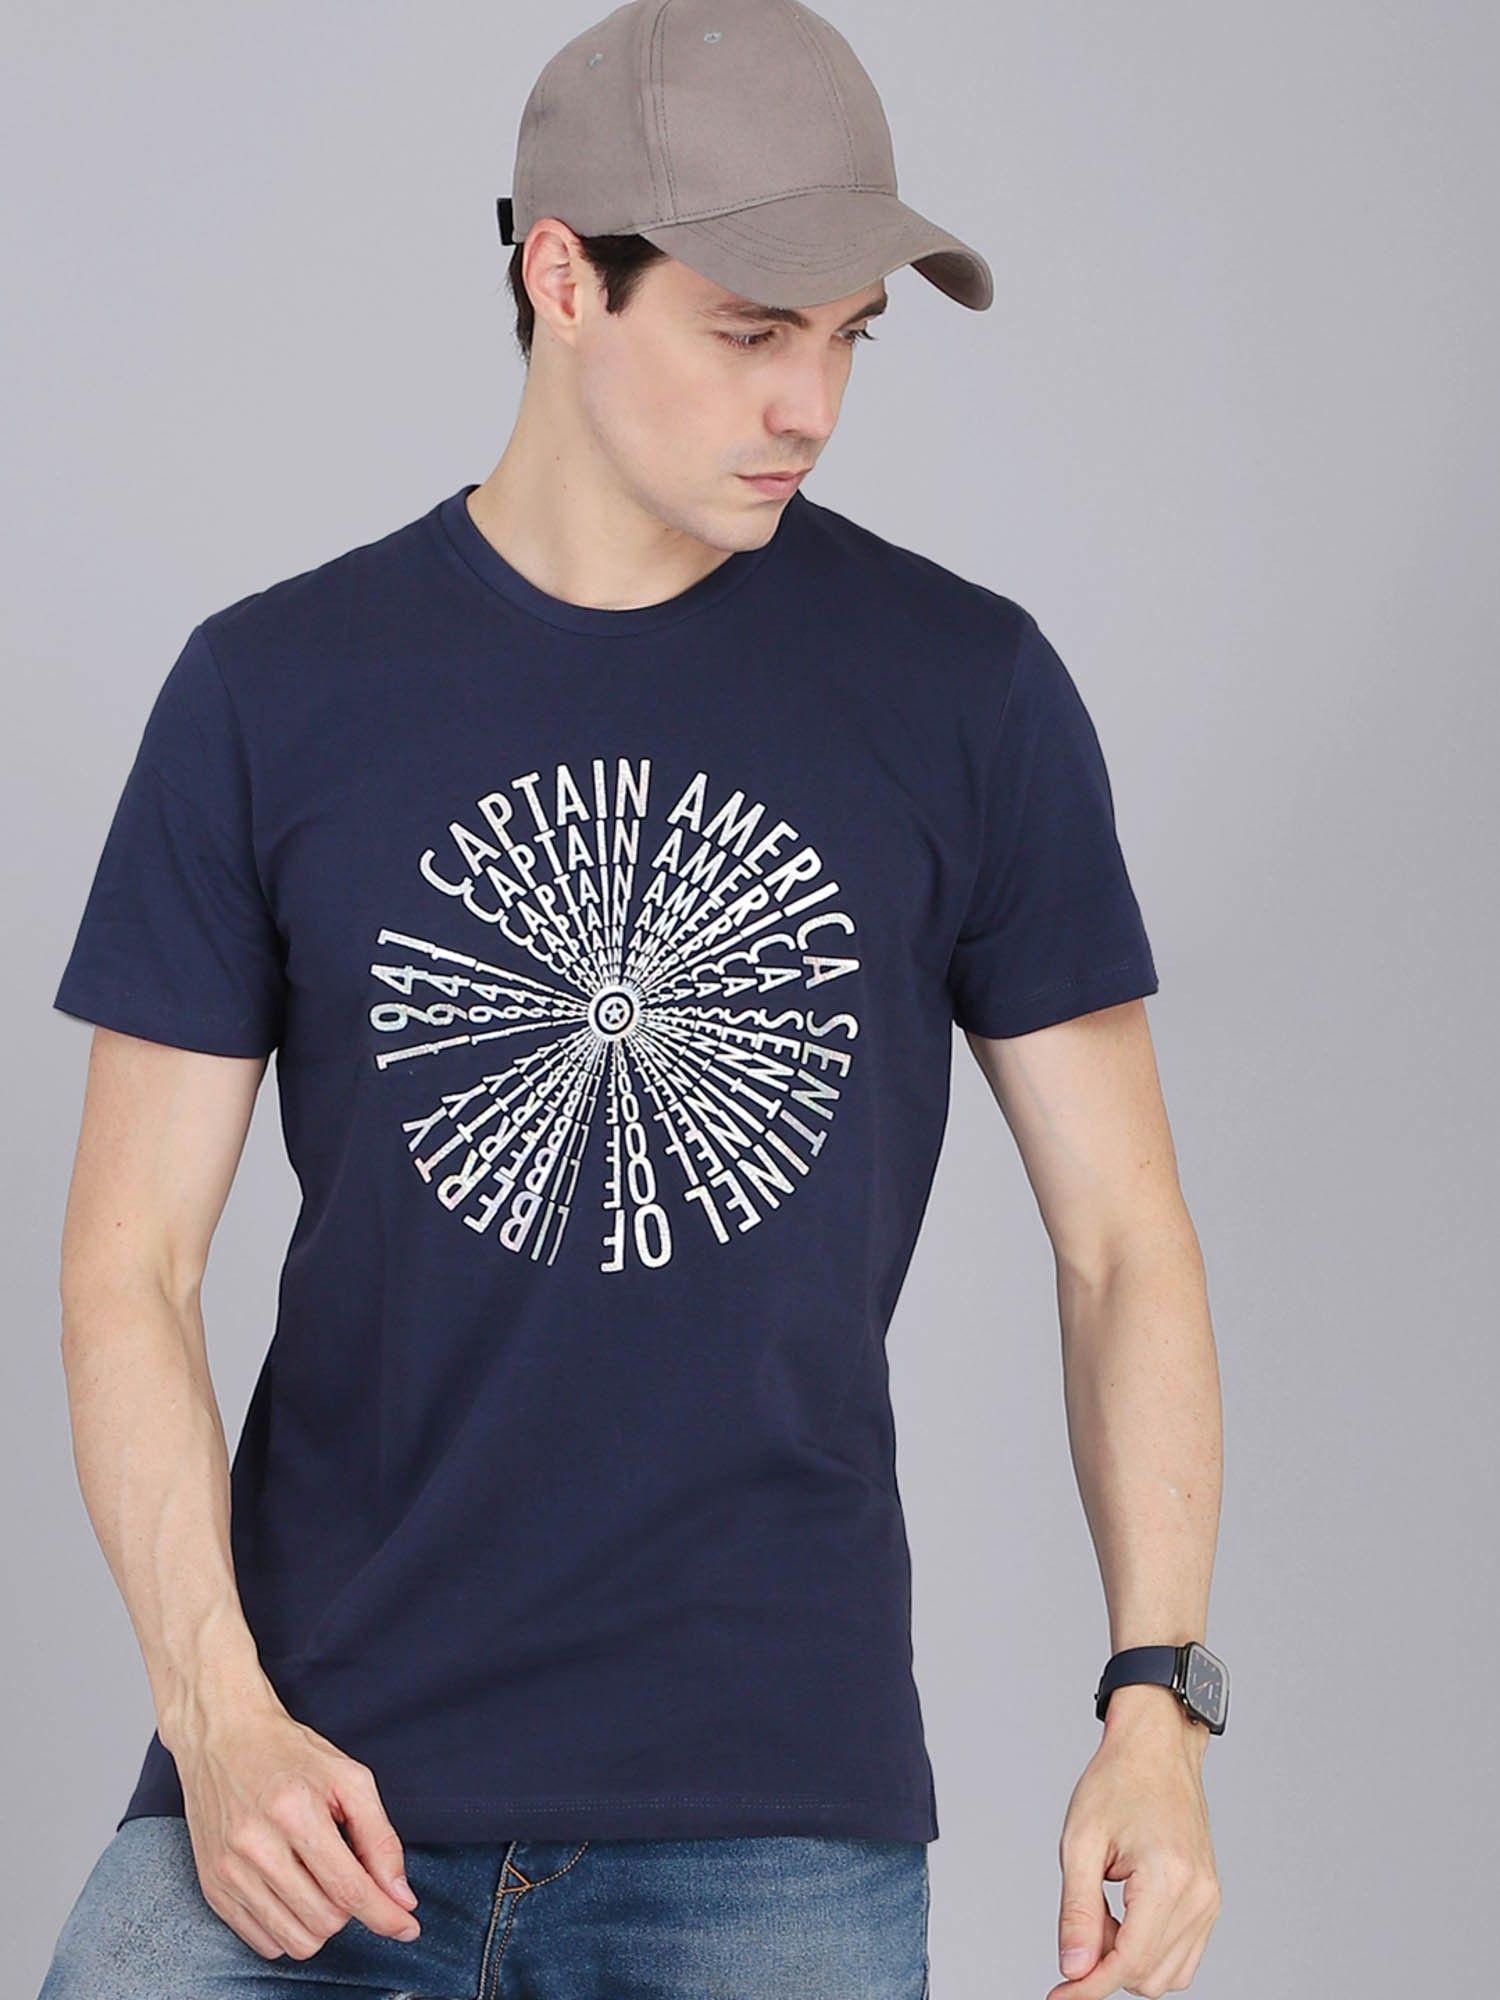 captain america featured t-shirt for men